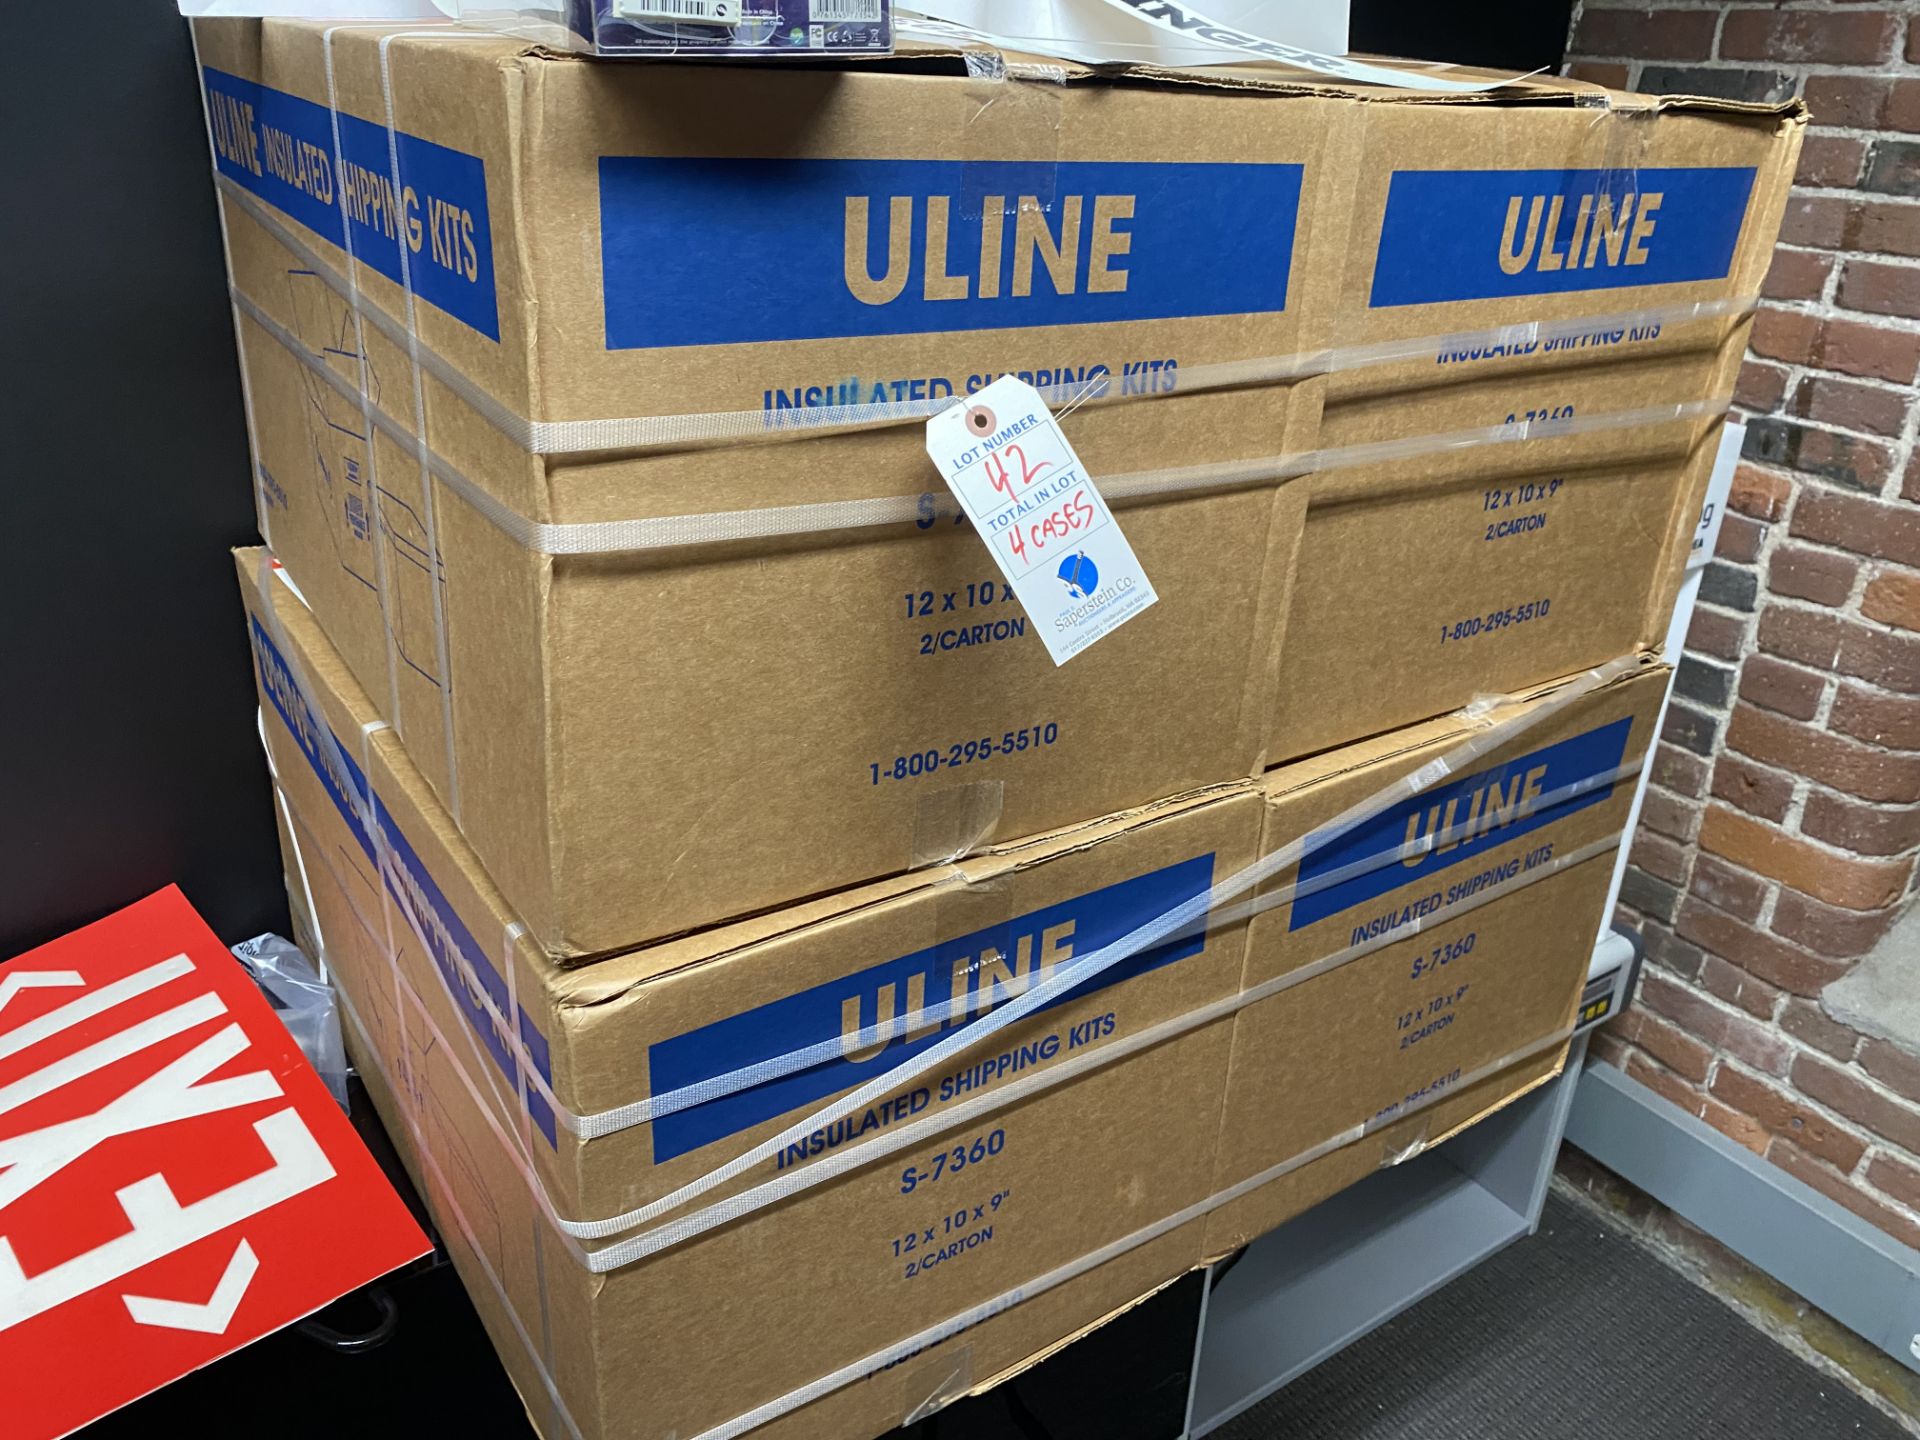 (4) NEW Cases of Uline #S7360 Insulated Shipping Kits